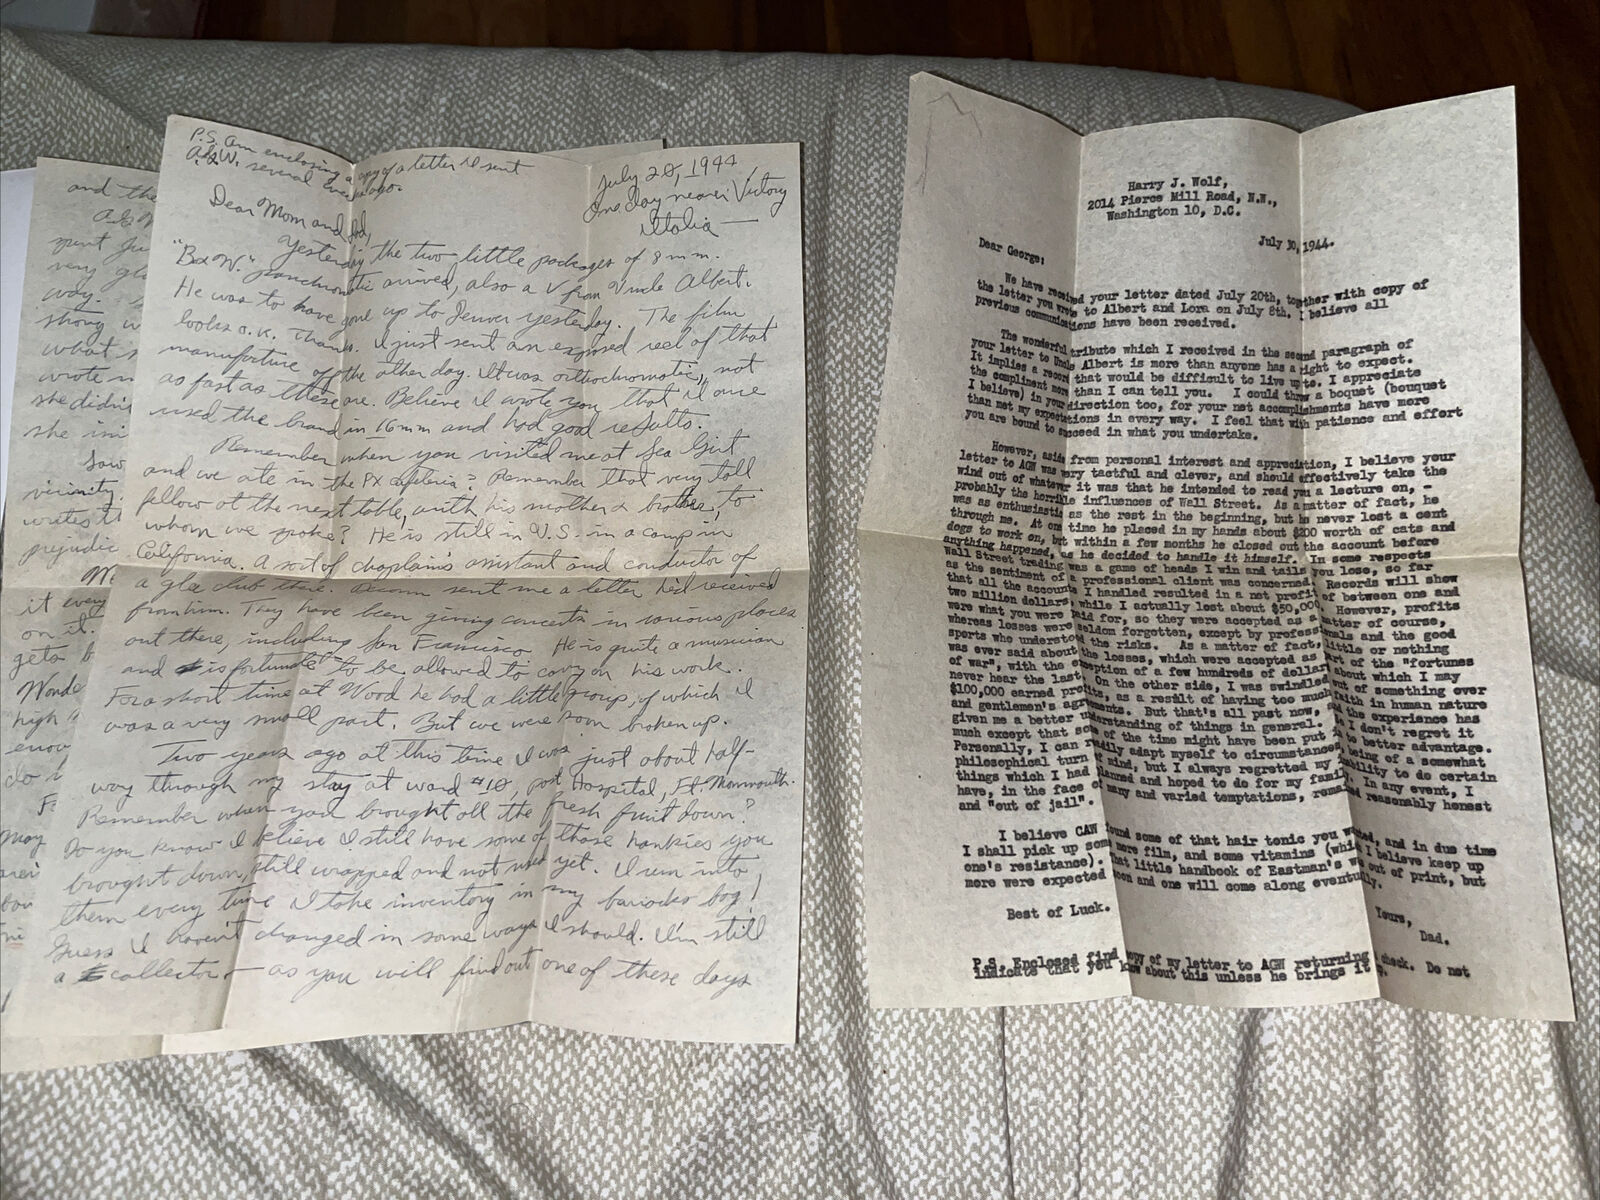 1944 WWII Army Sergeant Letter Home from Italy & Response from Dad Washington DC